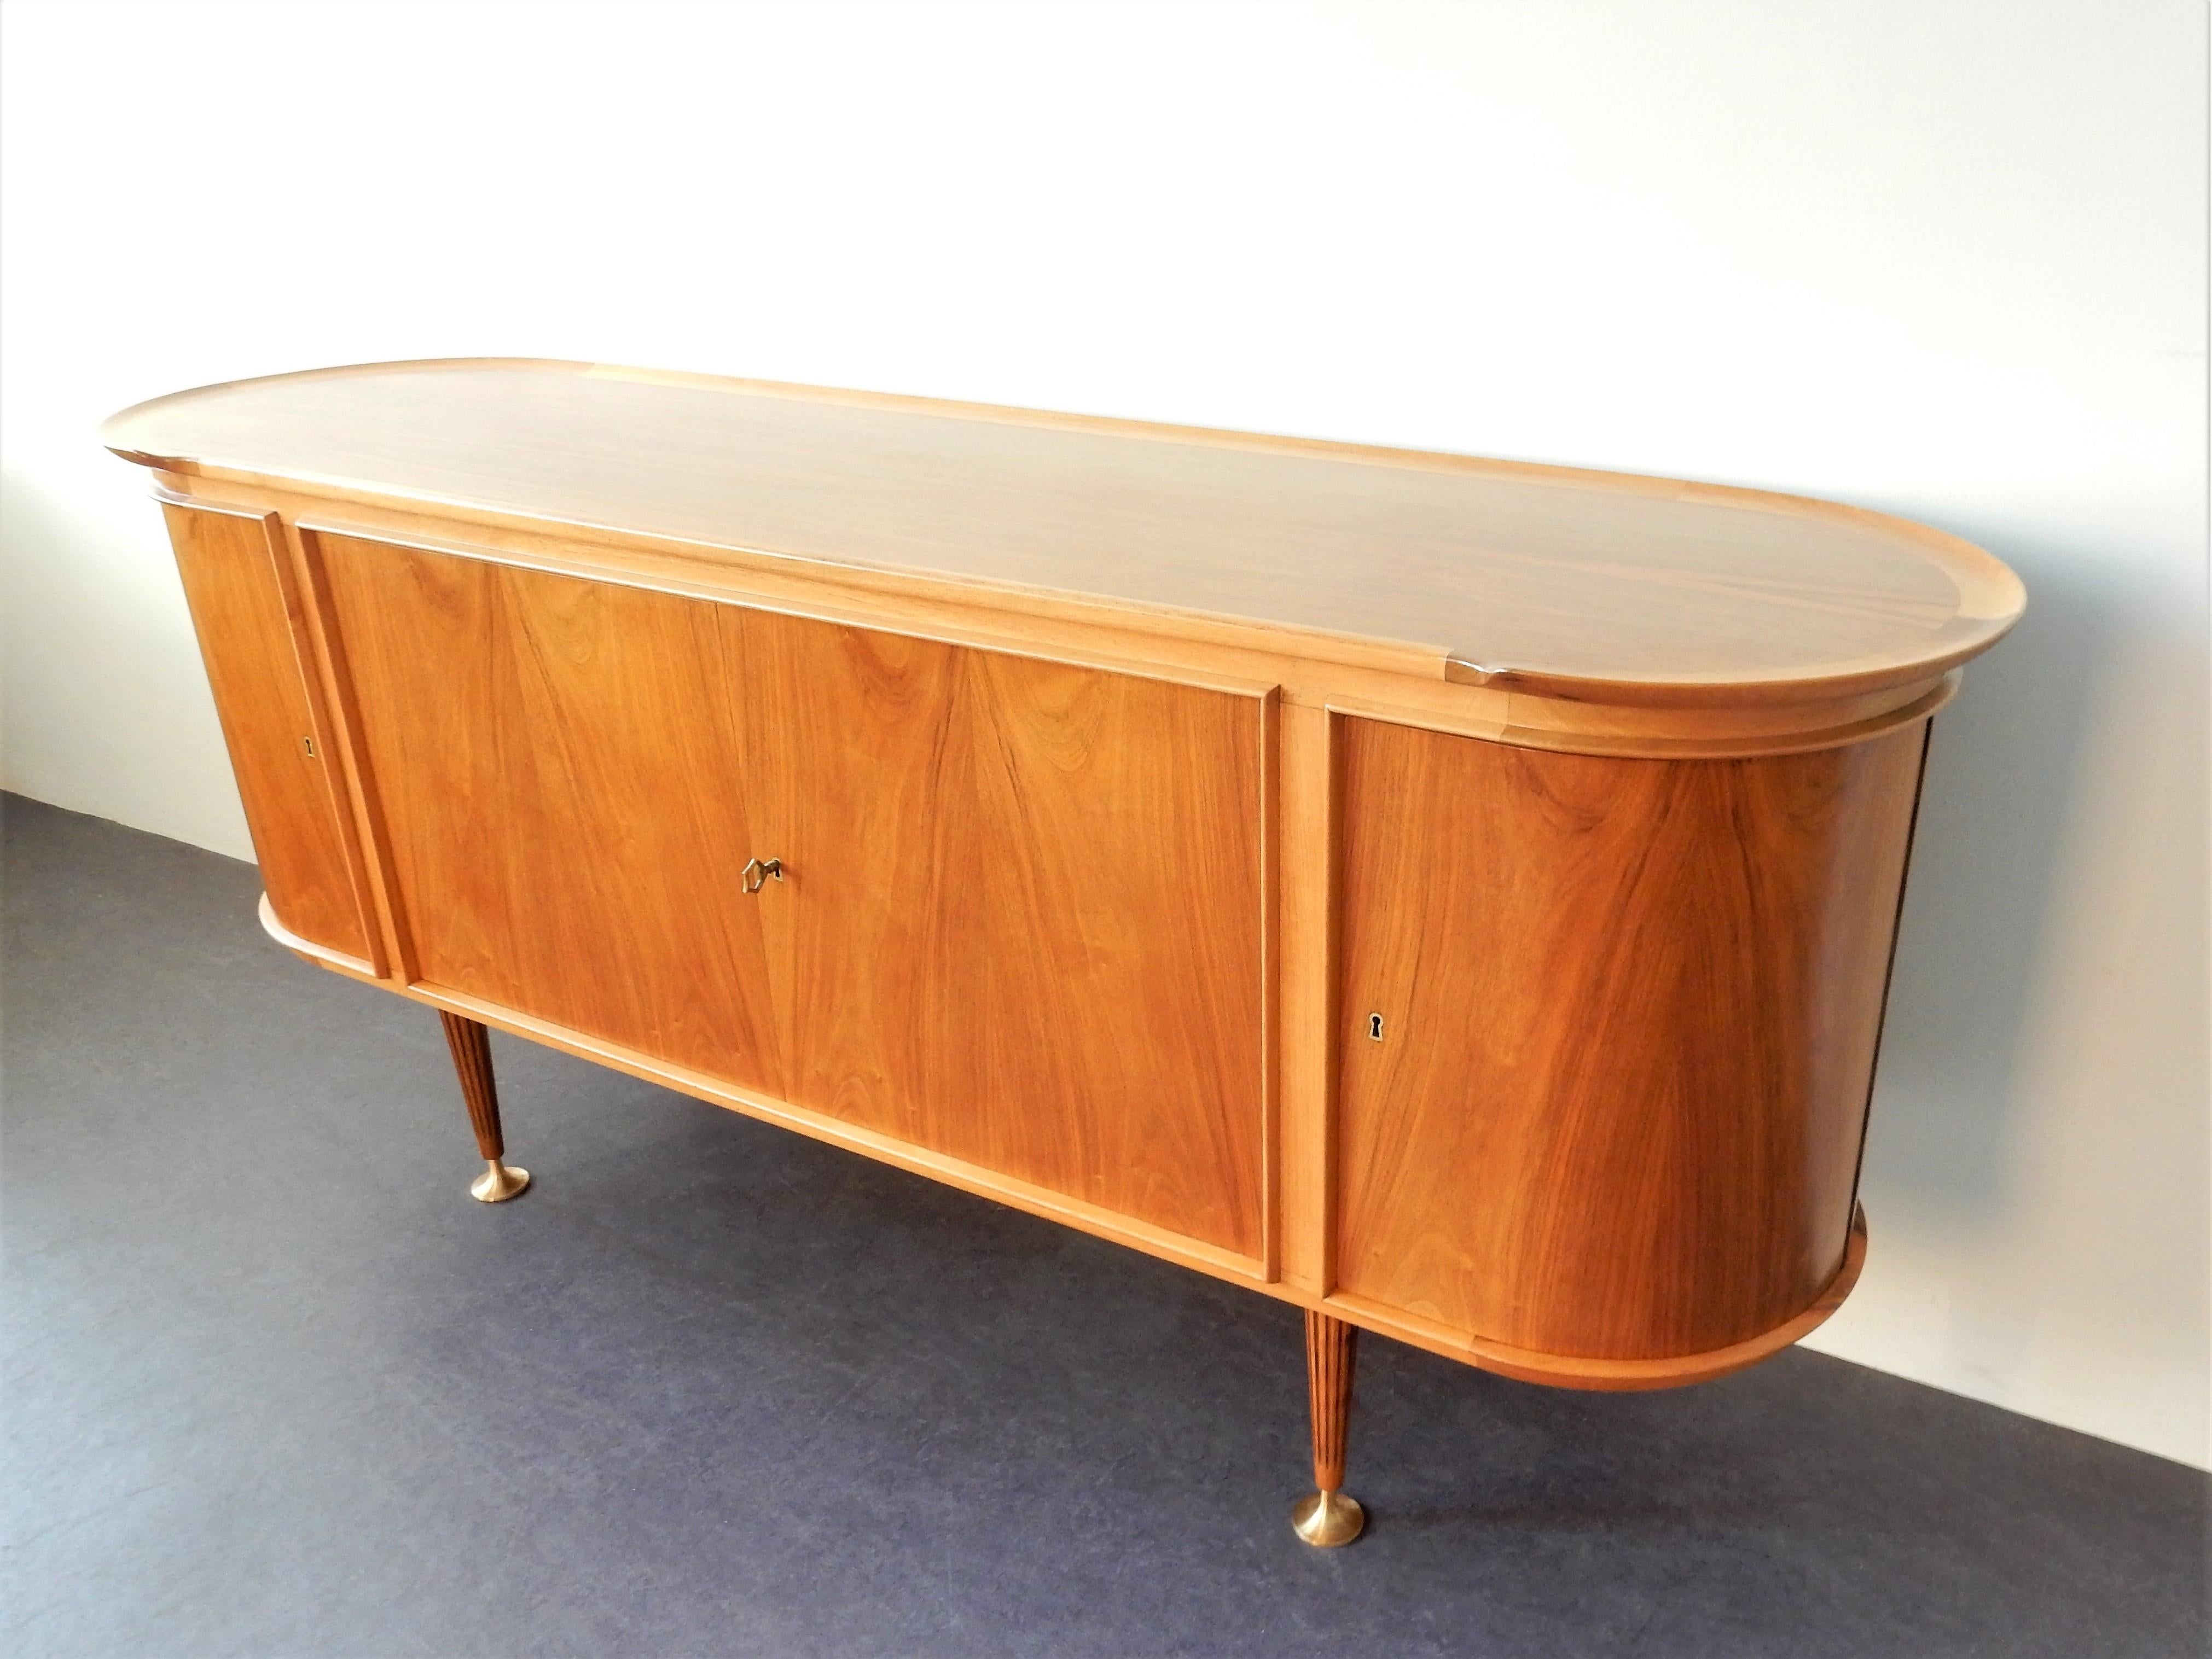 Brass 'Poly-Z' Sideboard by A.A. Patijn for Zijlstra Joure, the Netherlands, 1950s